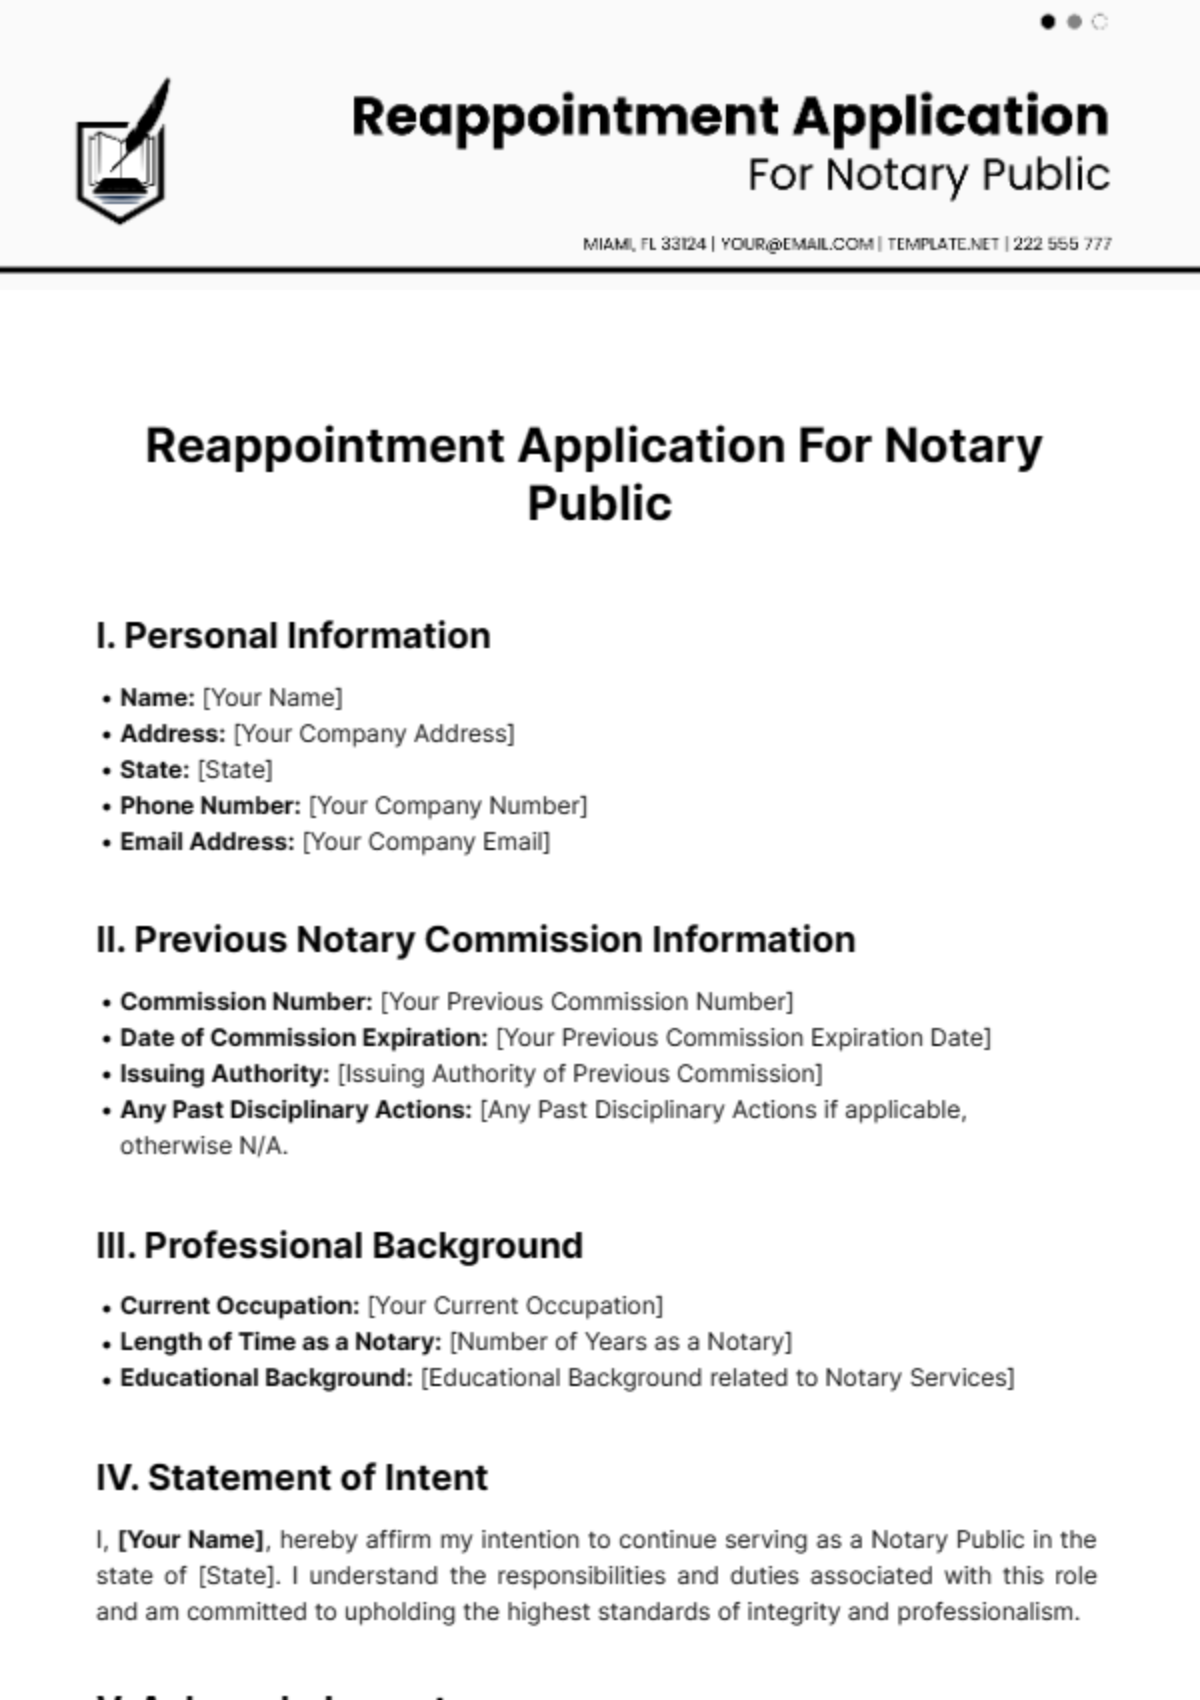 Reappointment Application For Notary Public Template